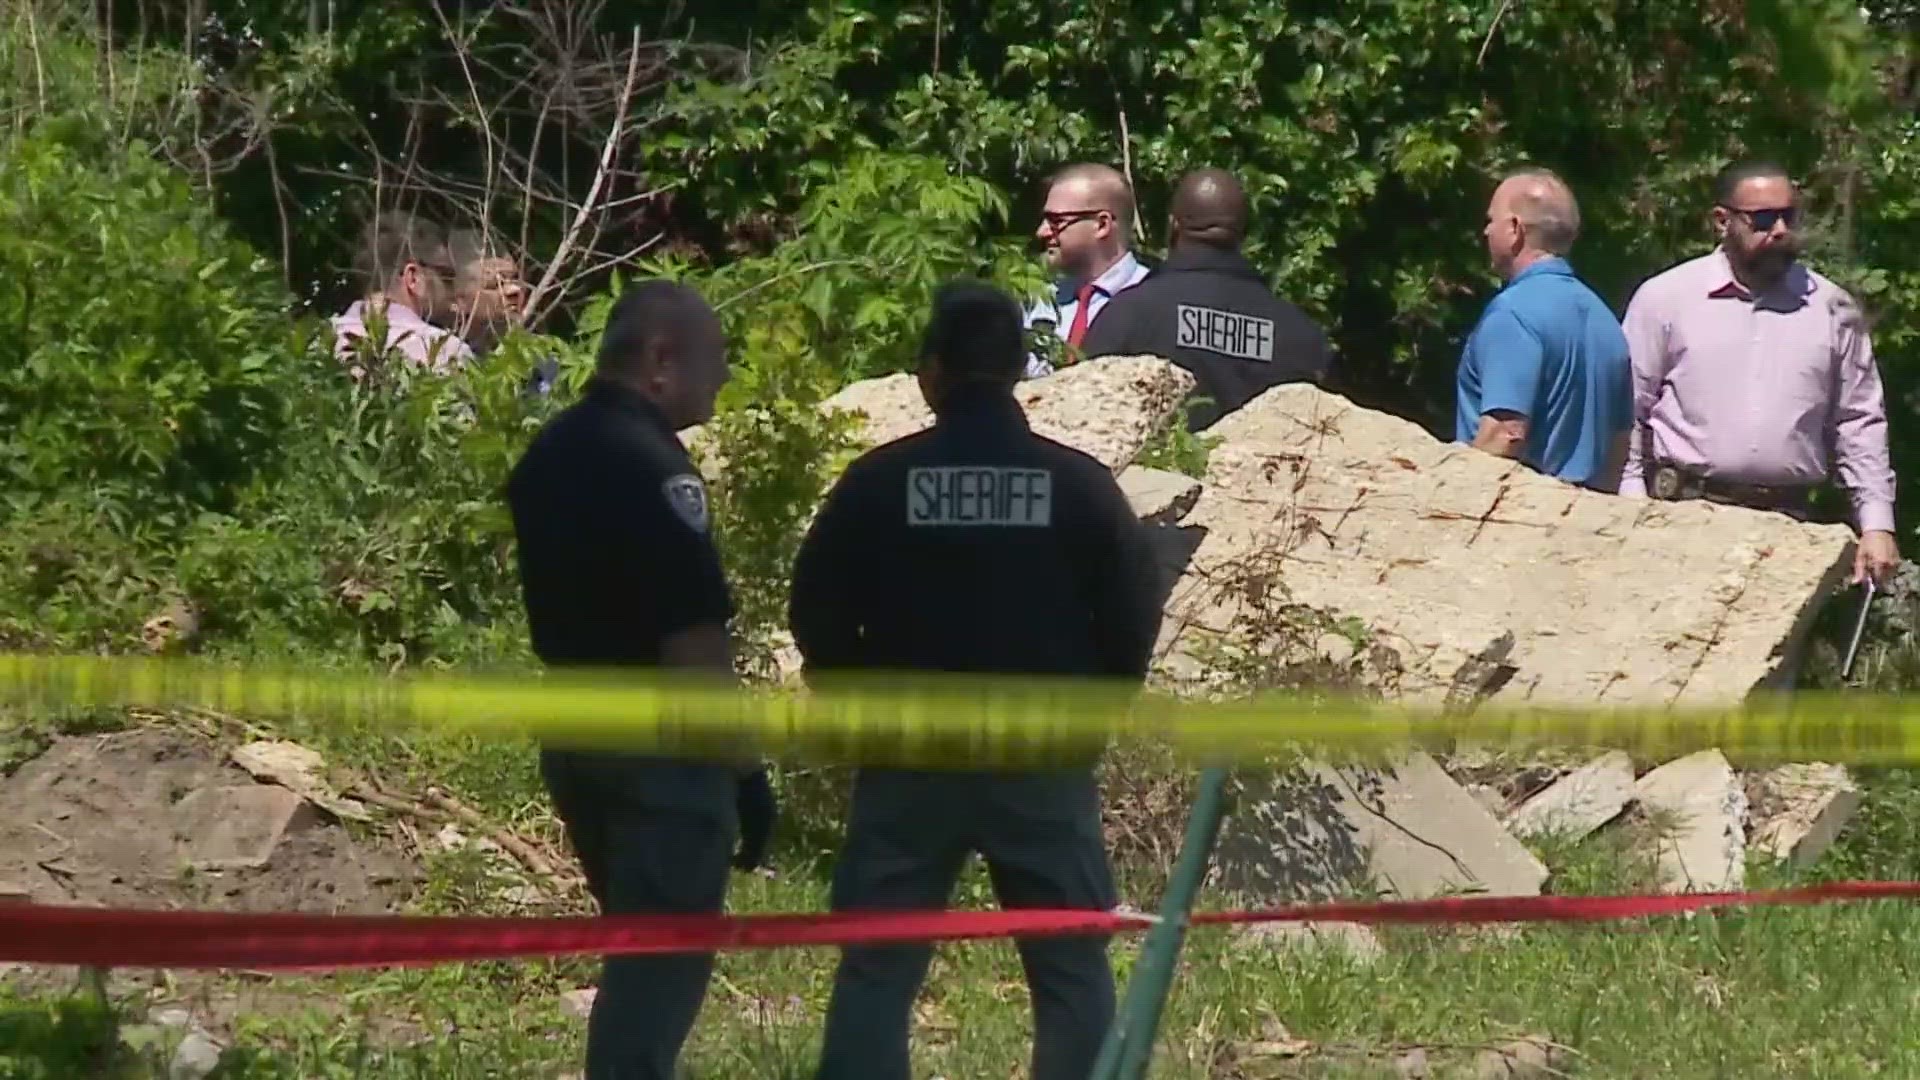 Three people living in a "makeshift homeless encampment" in a wooded area of Jefferson Parish were discovered to be shot and killed Wednesday in Jefferson Parish.